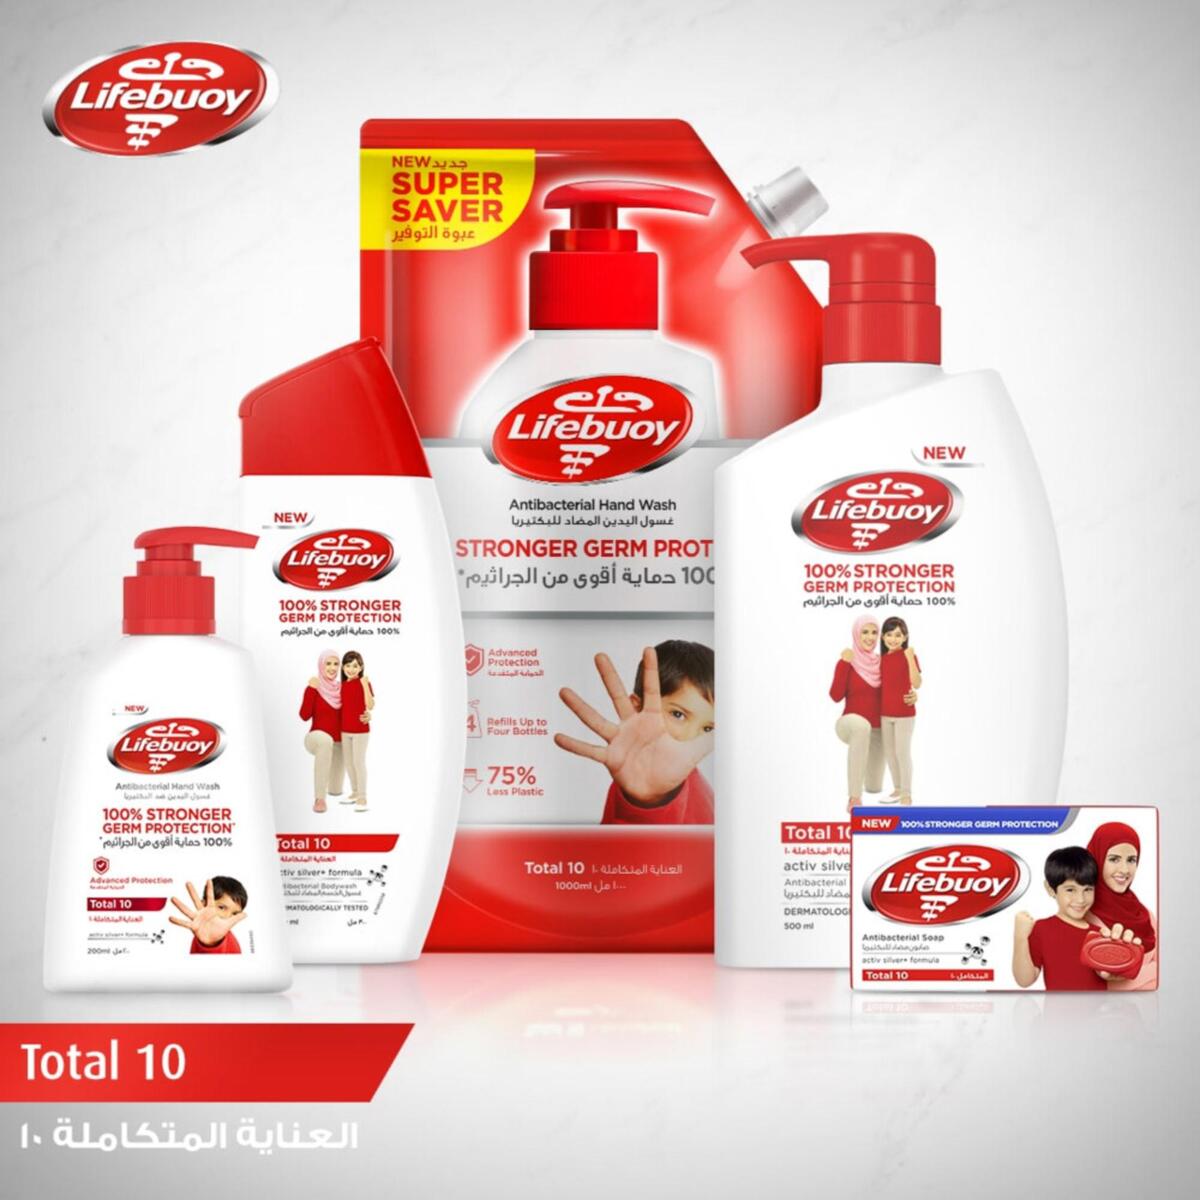 Lifebuoy Antibacterial Hand Wash, Total 10, For 100% Stronger Germ Protection In 10 Seconds, 500 ml